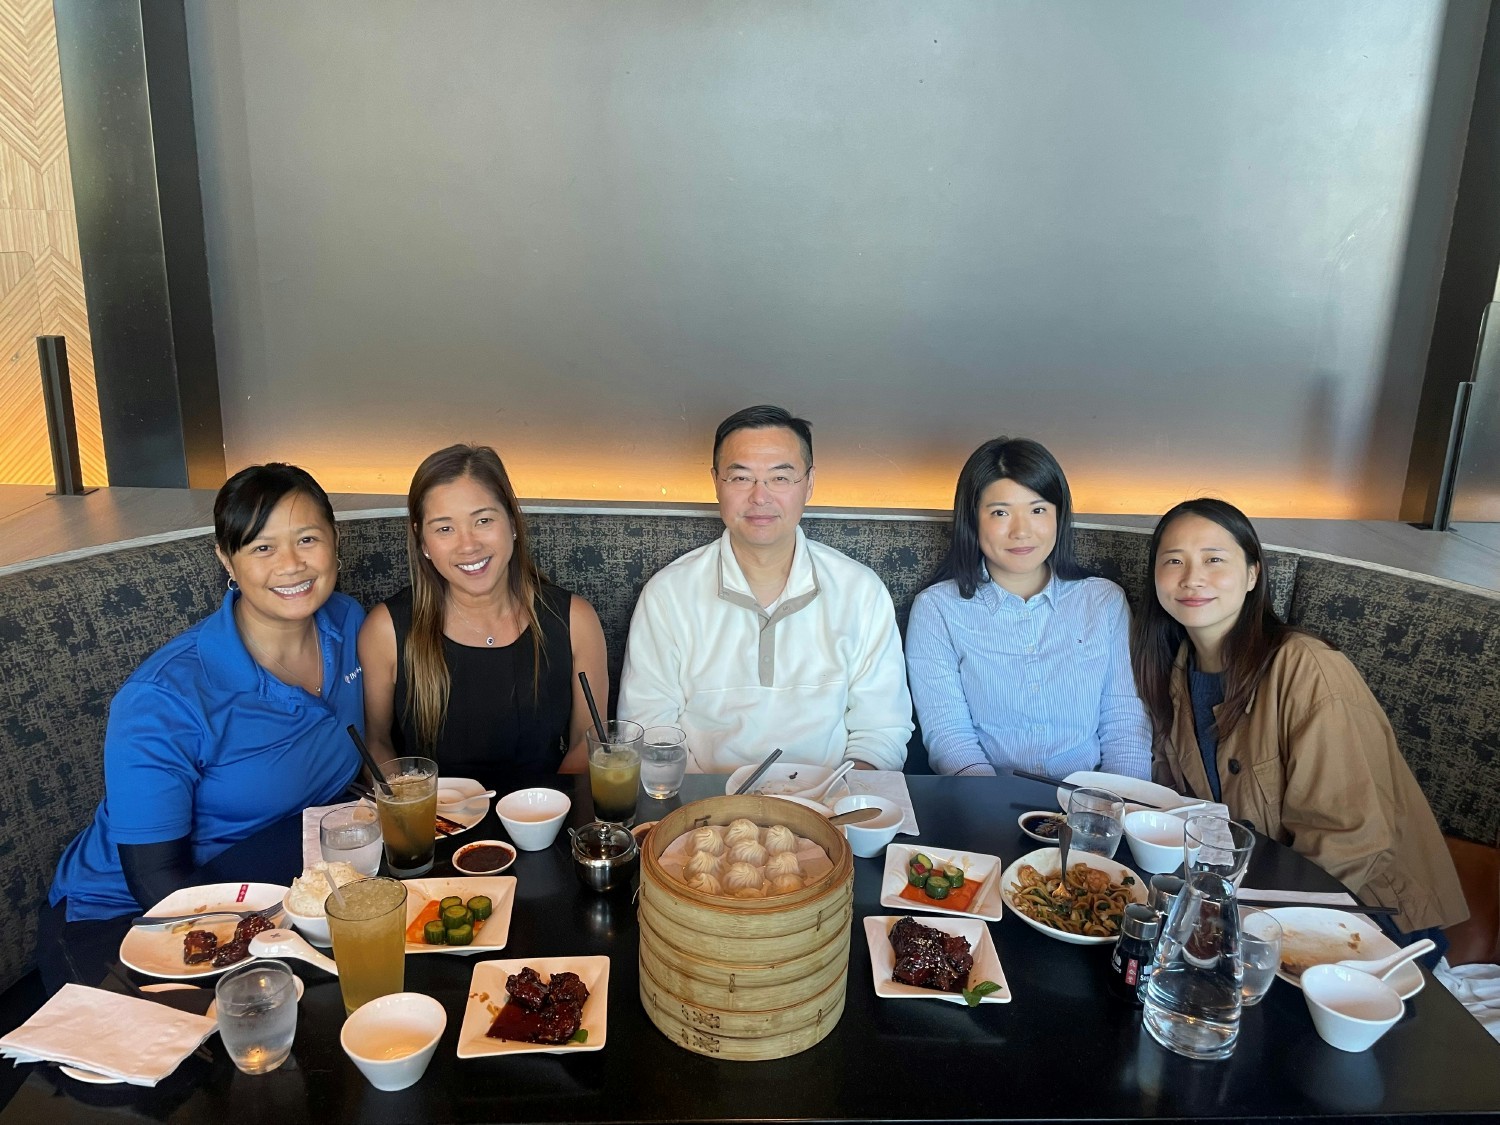 Administration Staff Team Lunch with CEO, Yang Xu